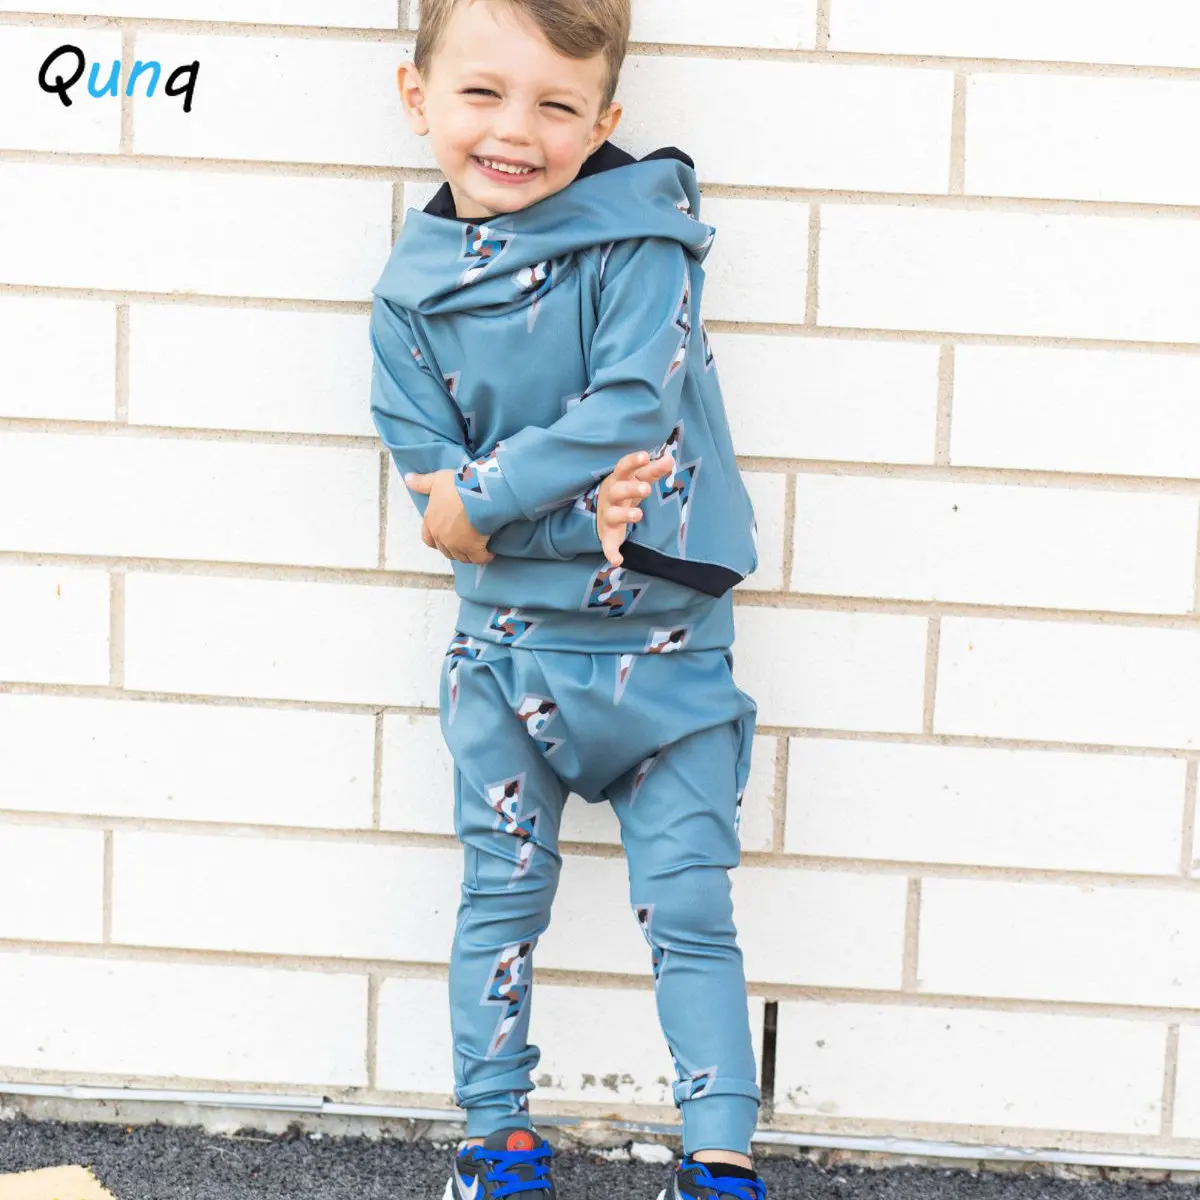 

Qunq Spring Autumn New Boys Long Sleeve Printing Stitching Hooded Pullover Top+Pants 2 Pieces Set Casual Kids Clothes Age 3T-8T